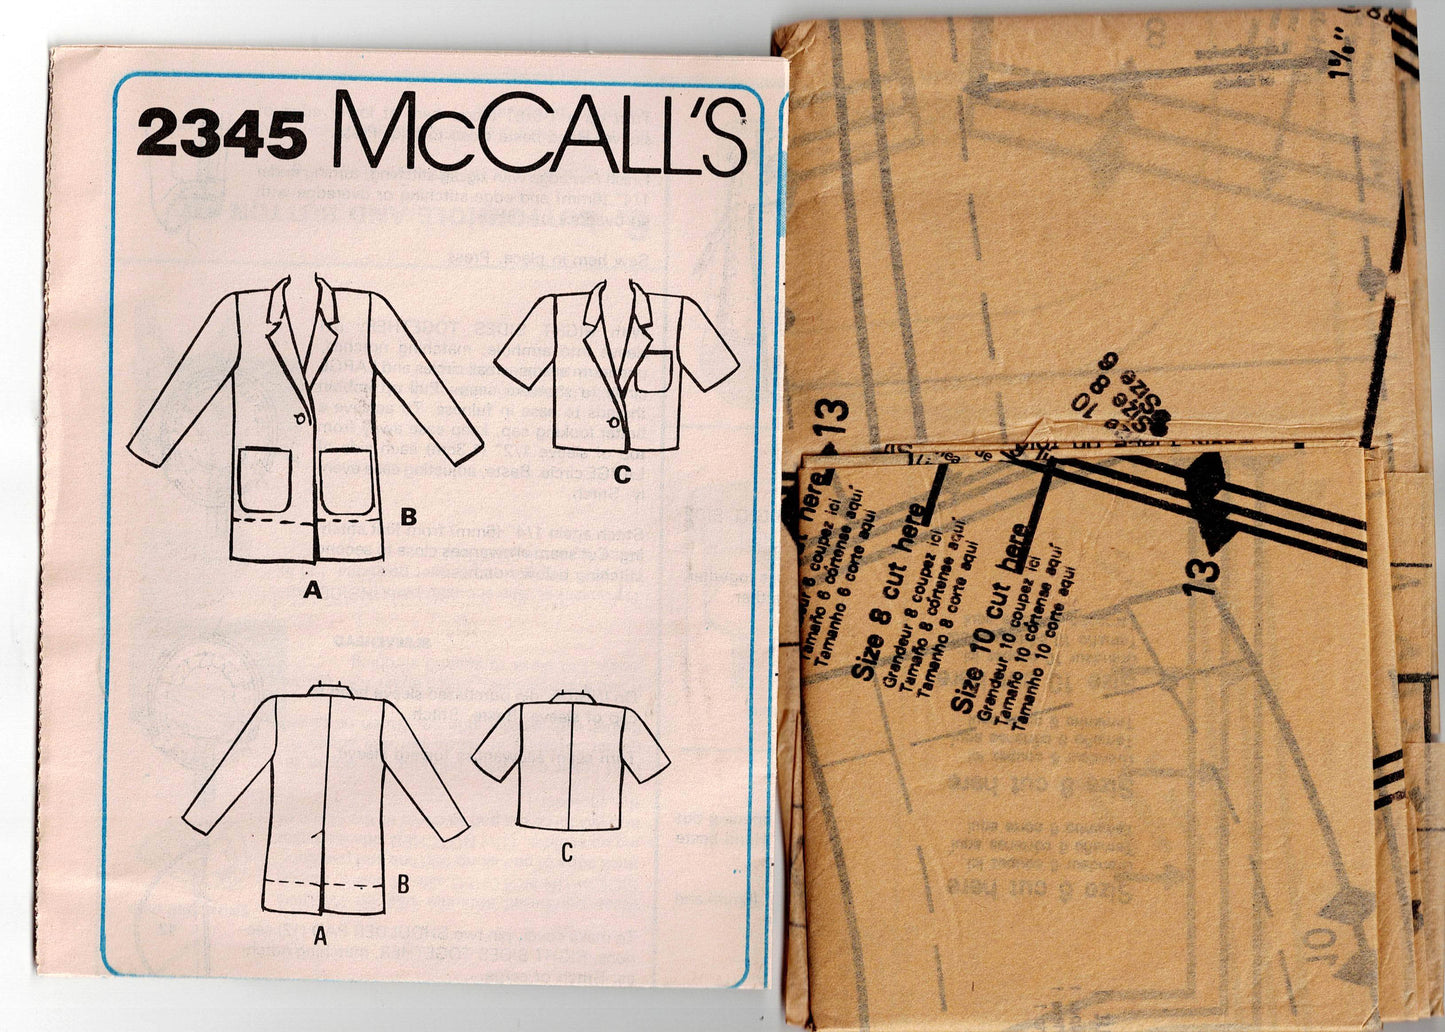 McCall's 2345 Womens Short or Long Sleeved Jacket 1980s Vintage Sewing Pattern Size 6 - 10 UNCUT Factory Folded